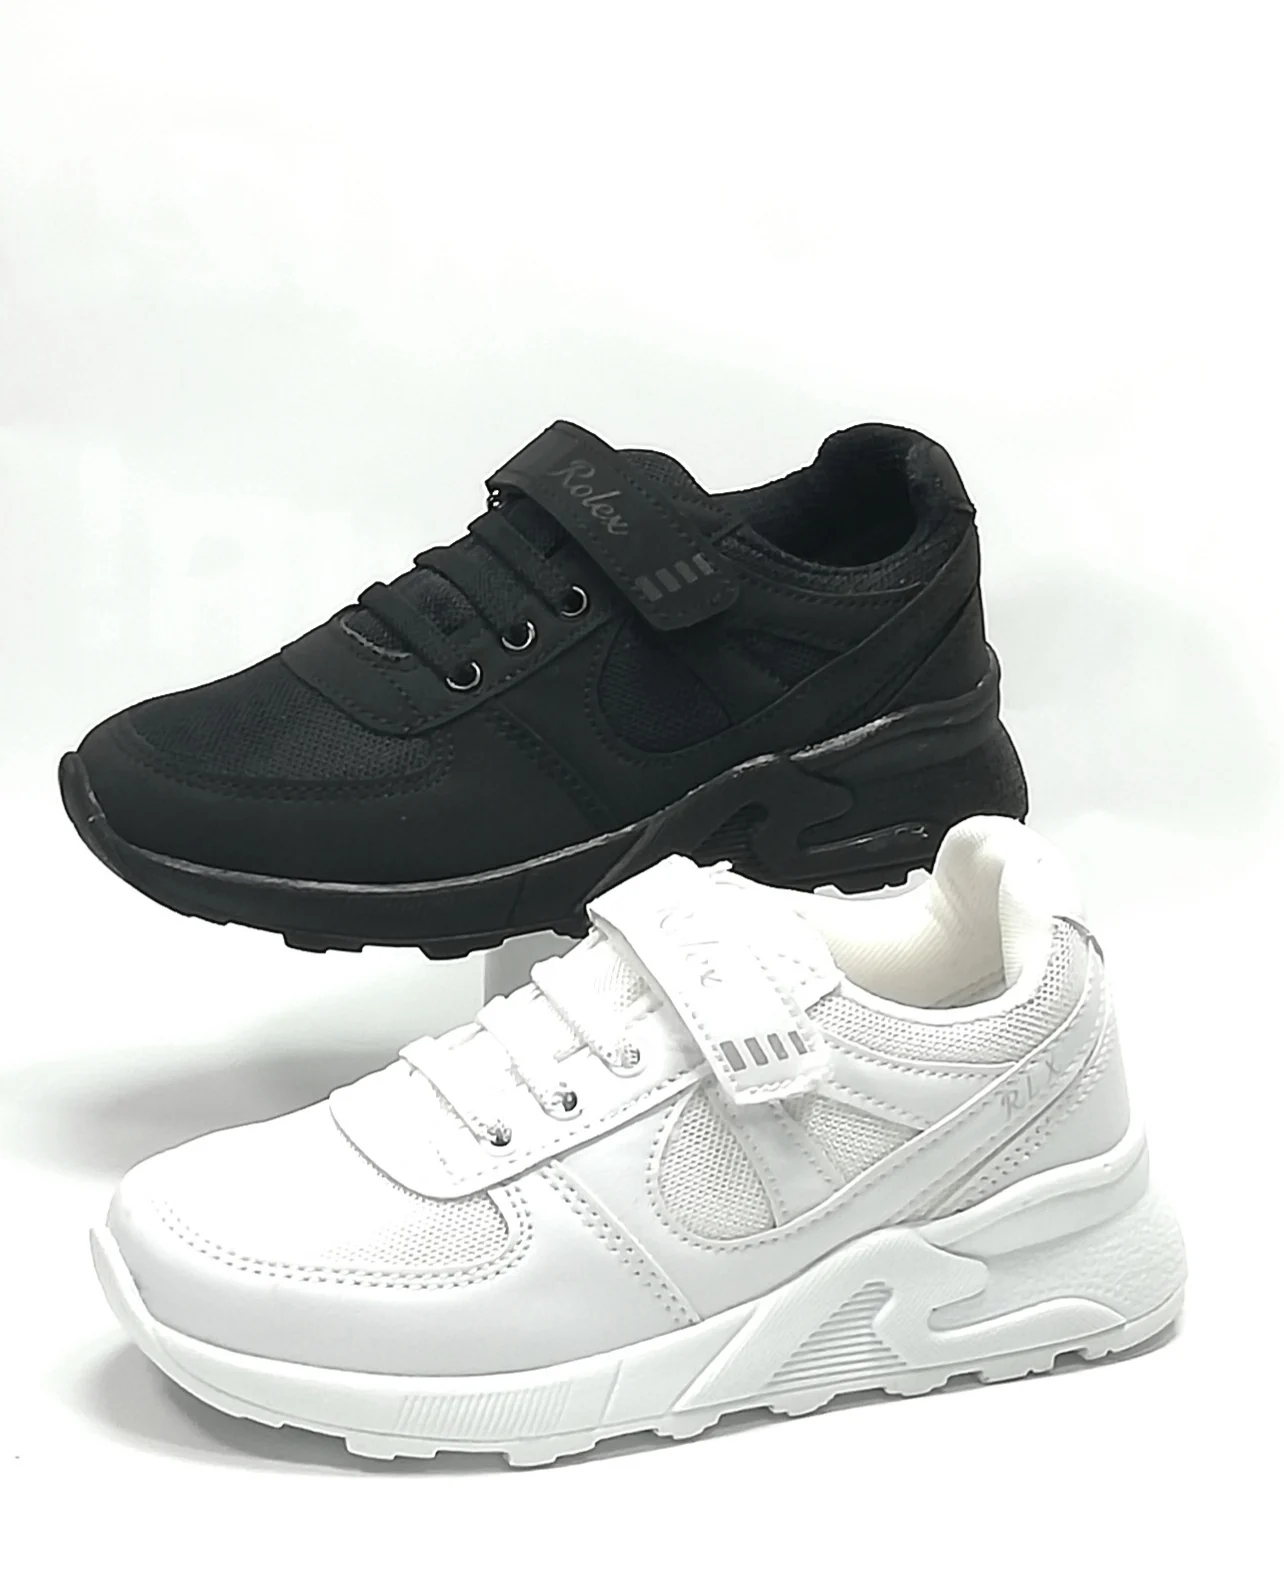 

UNISEX SNEAKERS FOR GIRLS AND FOR MEN. BLACK AND WHITE COLOR. CAN BREATHE. COMFORTABLE. NEW SEASON. 3.5 CM FILLER BASE